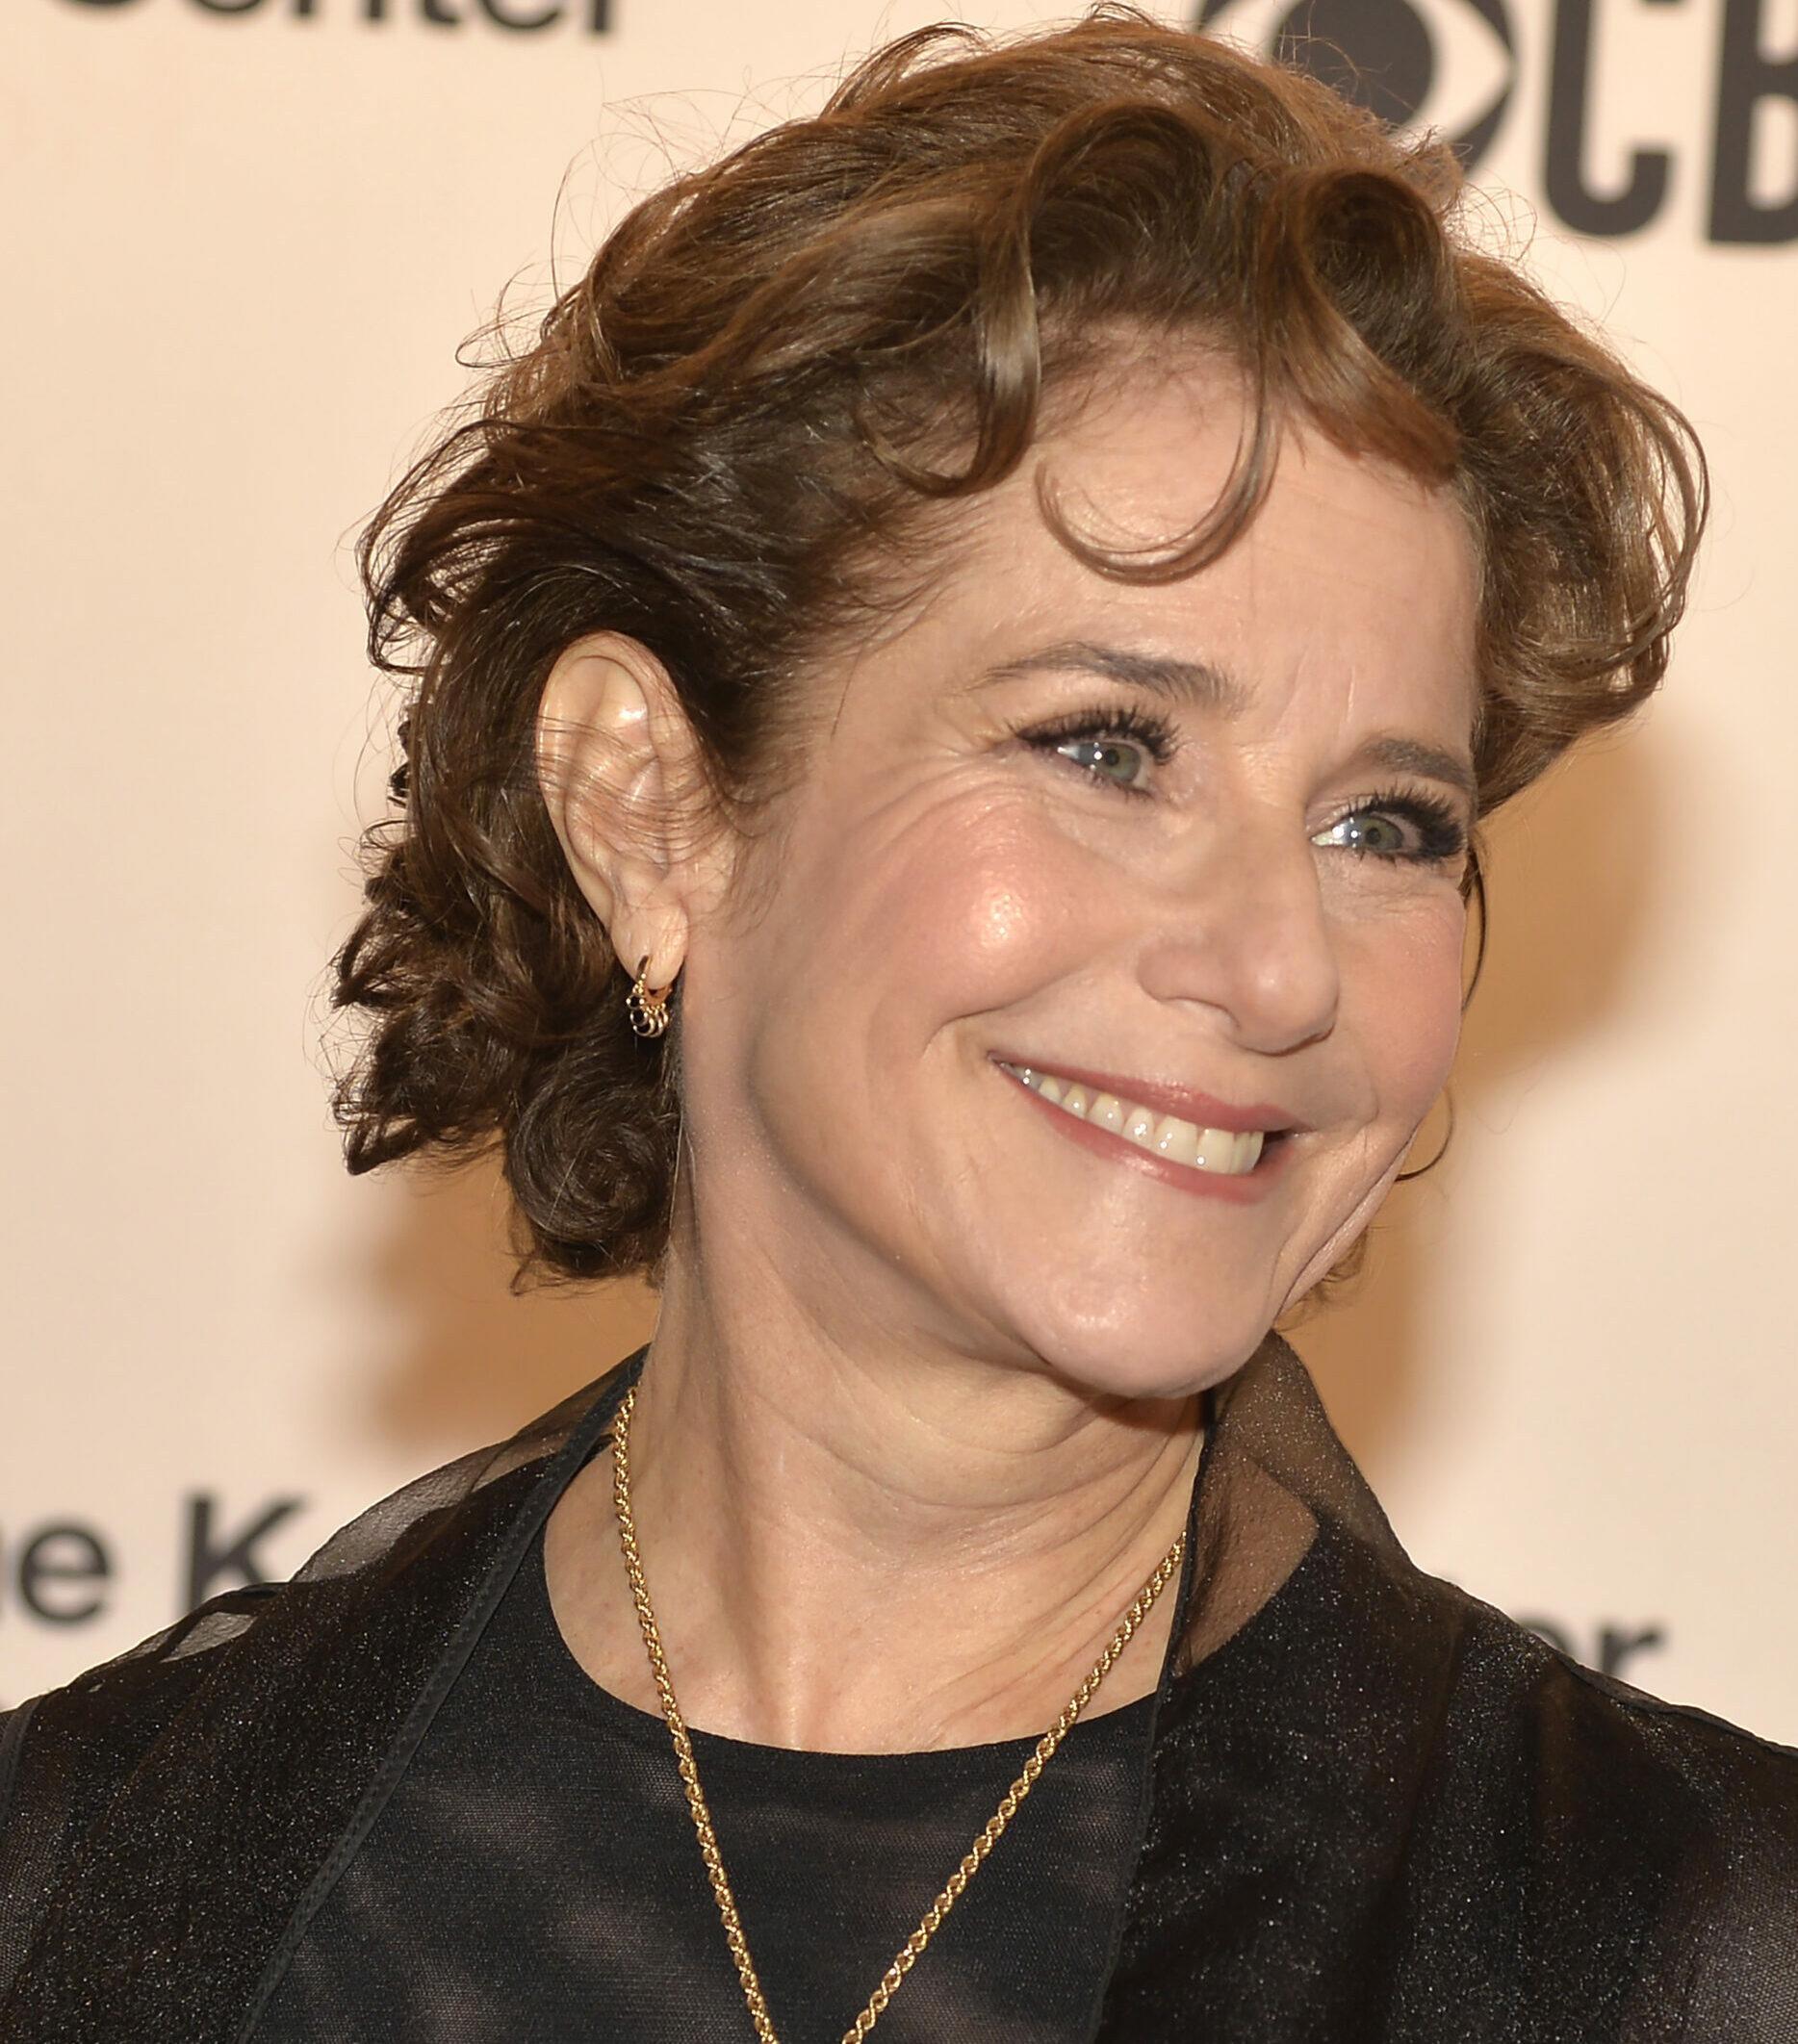 Actress Debra Winger arrives for a Kennedy Center gala performance, in Washington, Sunday, December 8, 2019.